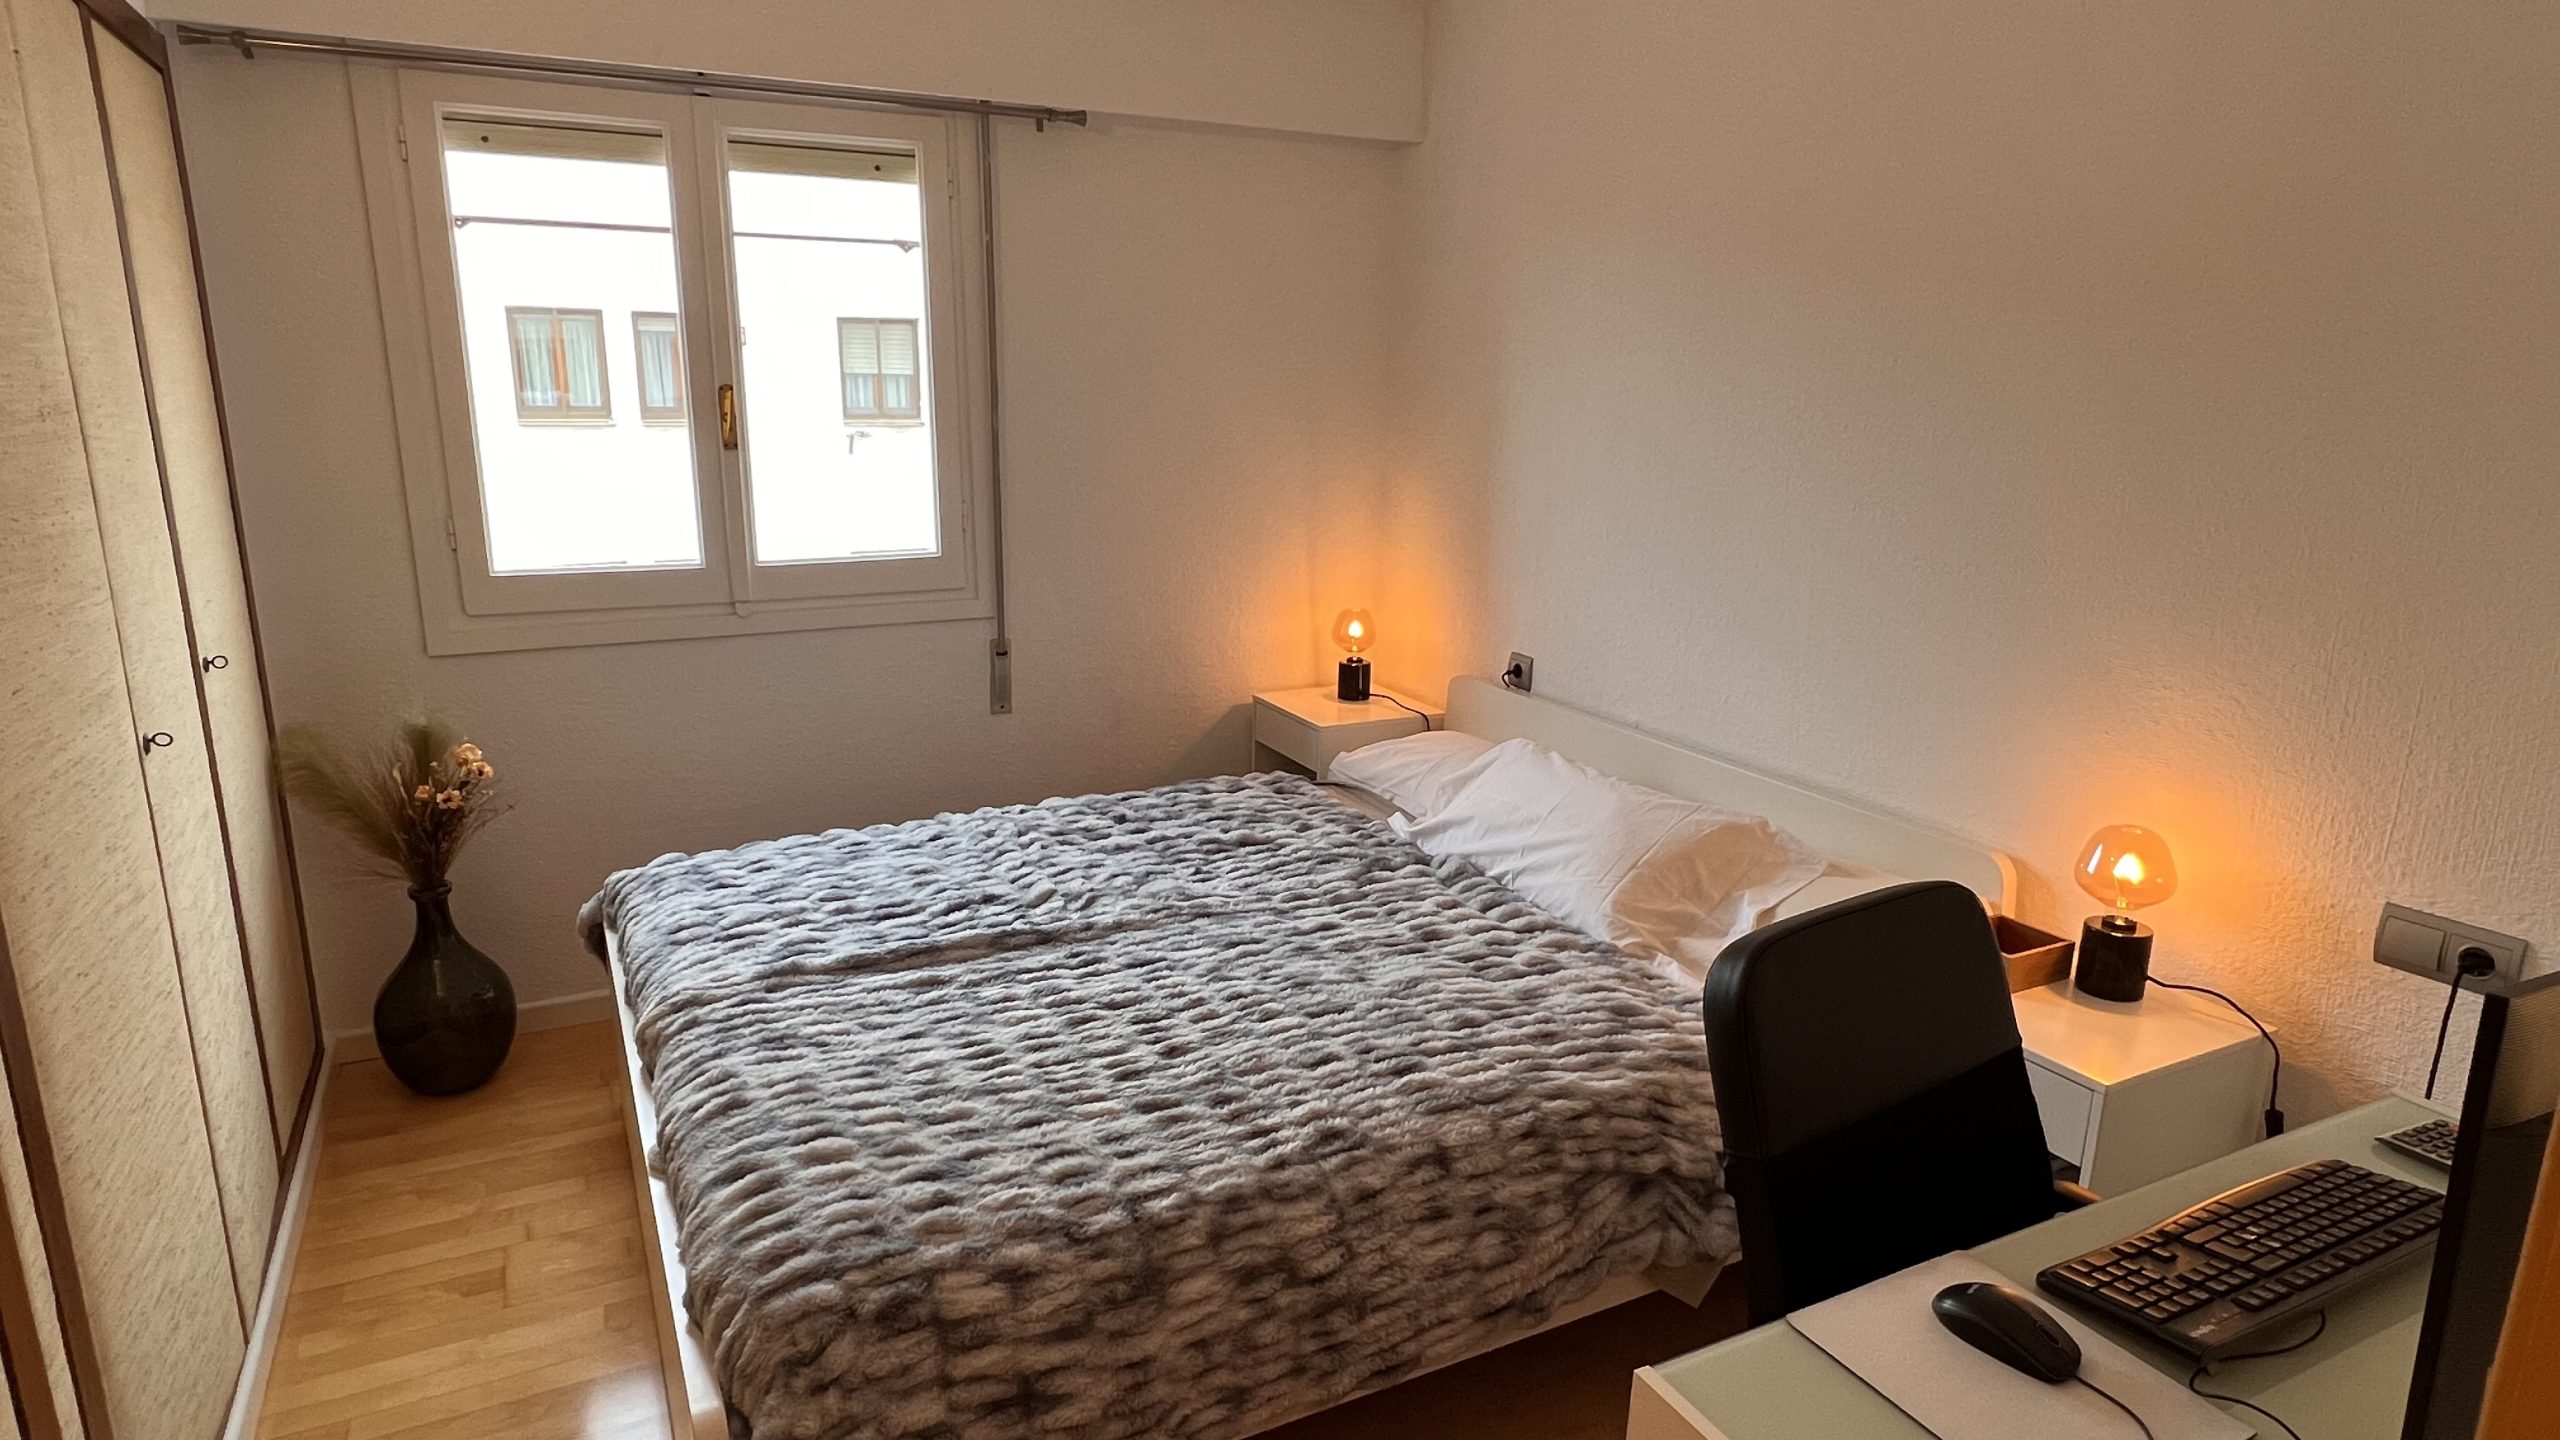 apartment for rent in Alicante - Bedroom